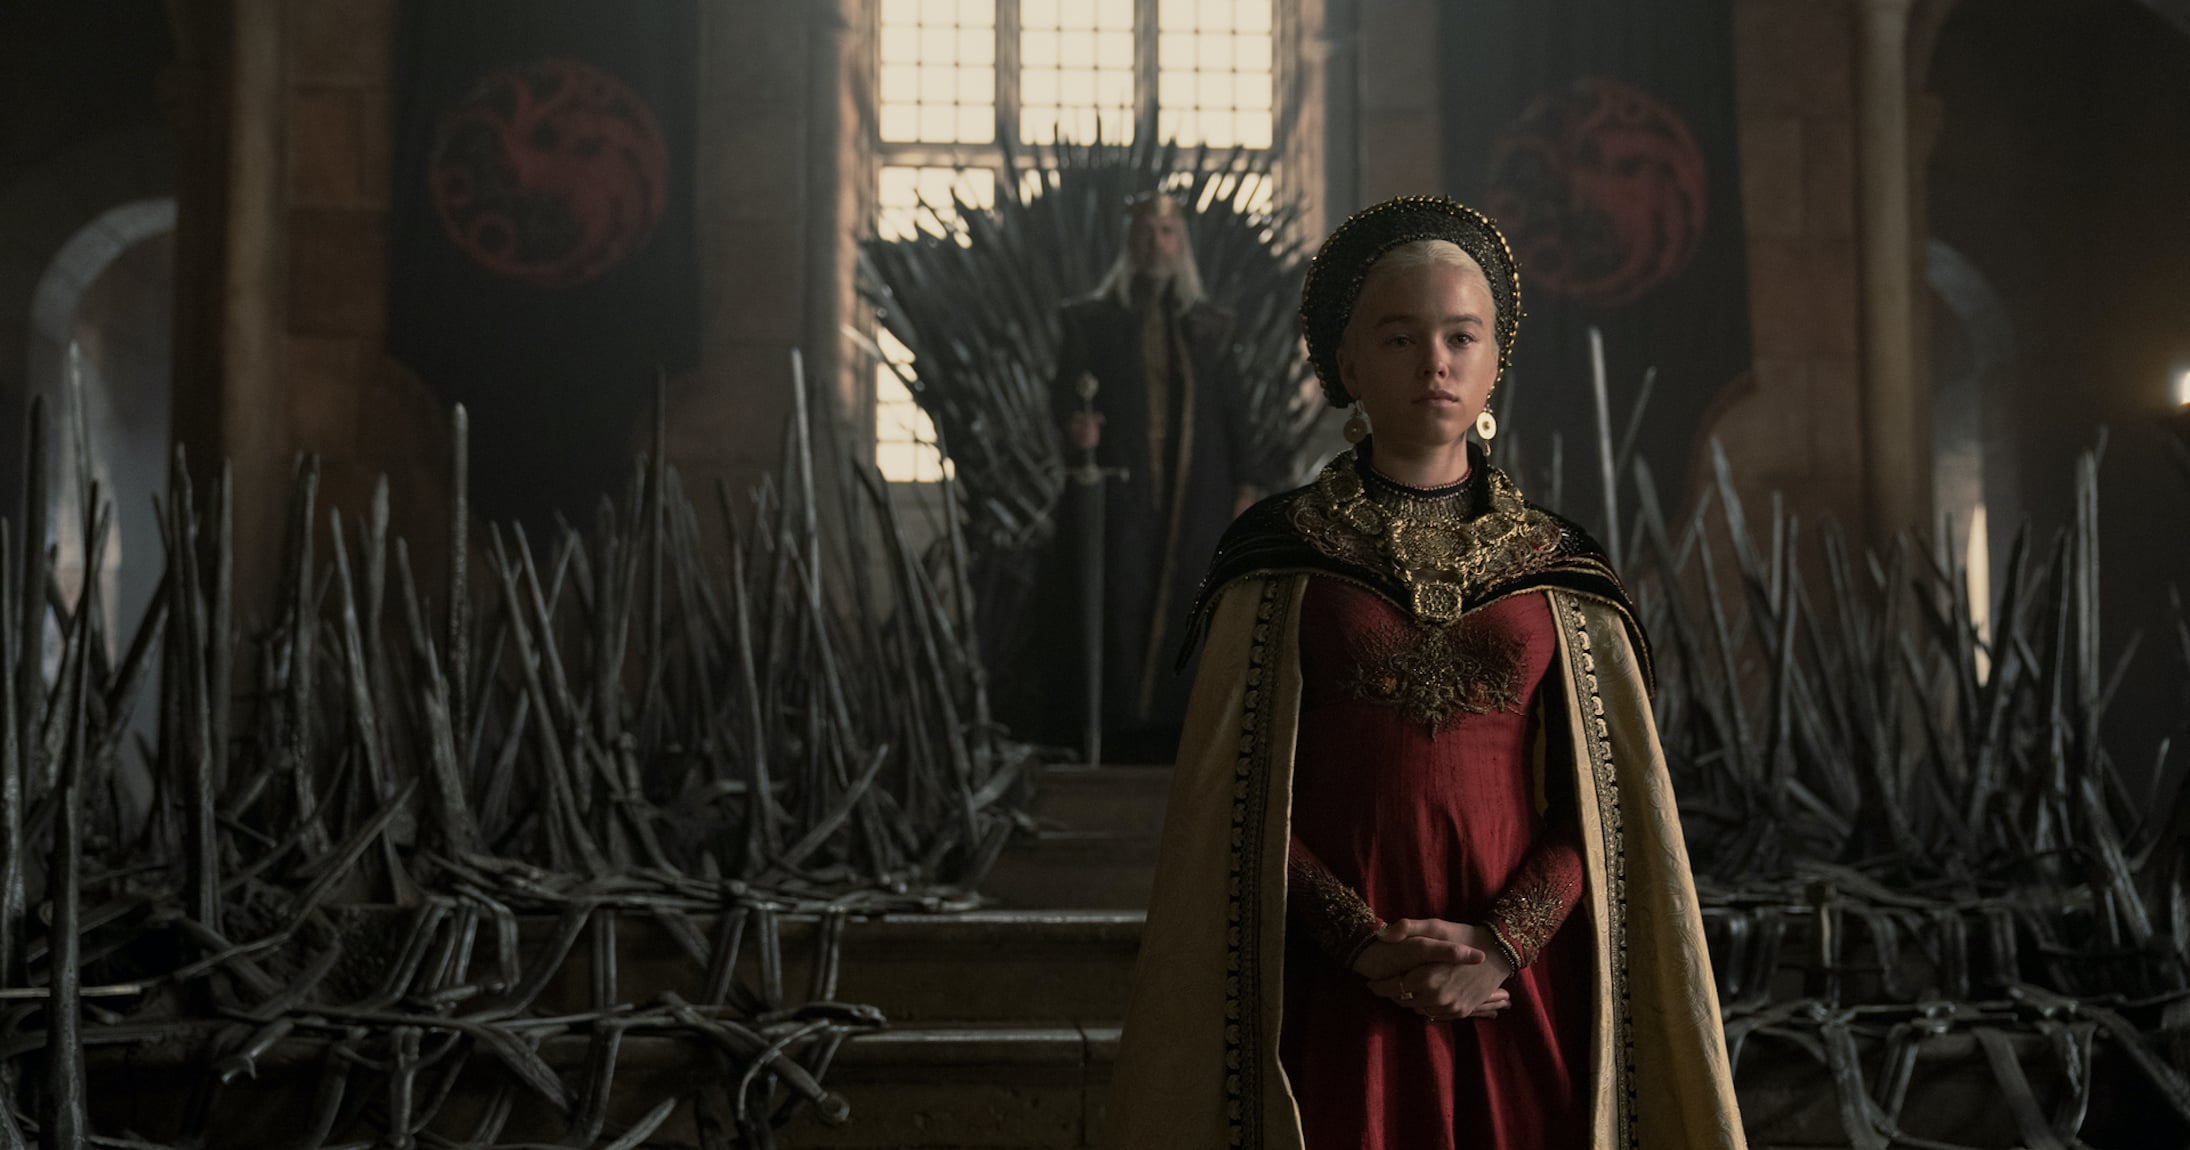 The New Game of Thrones spinoff announces its UK release date - 22